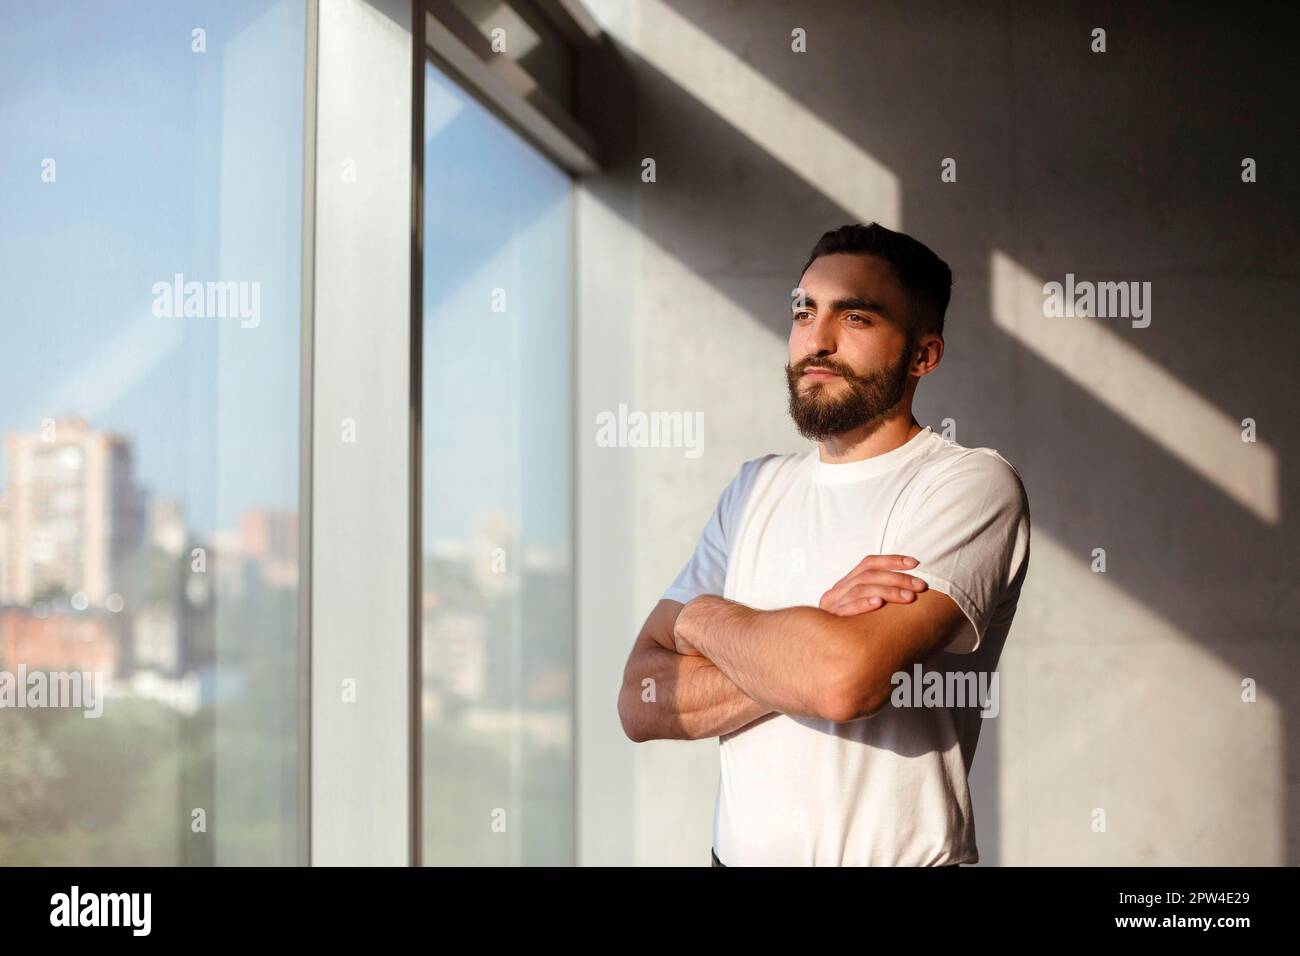 Bearded man in white t shirt looking at camera while standing near window in sunlit loft workplace Stock Photo